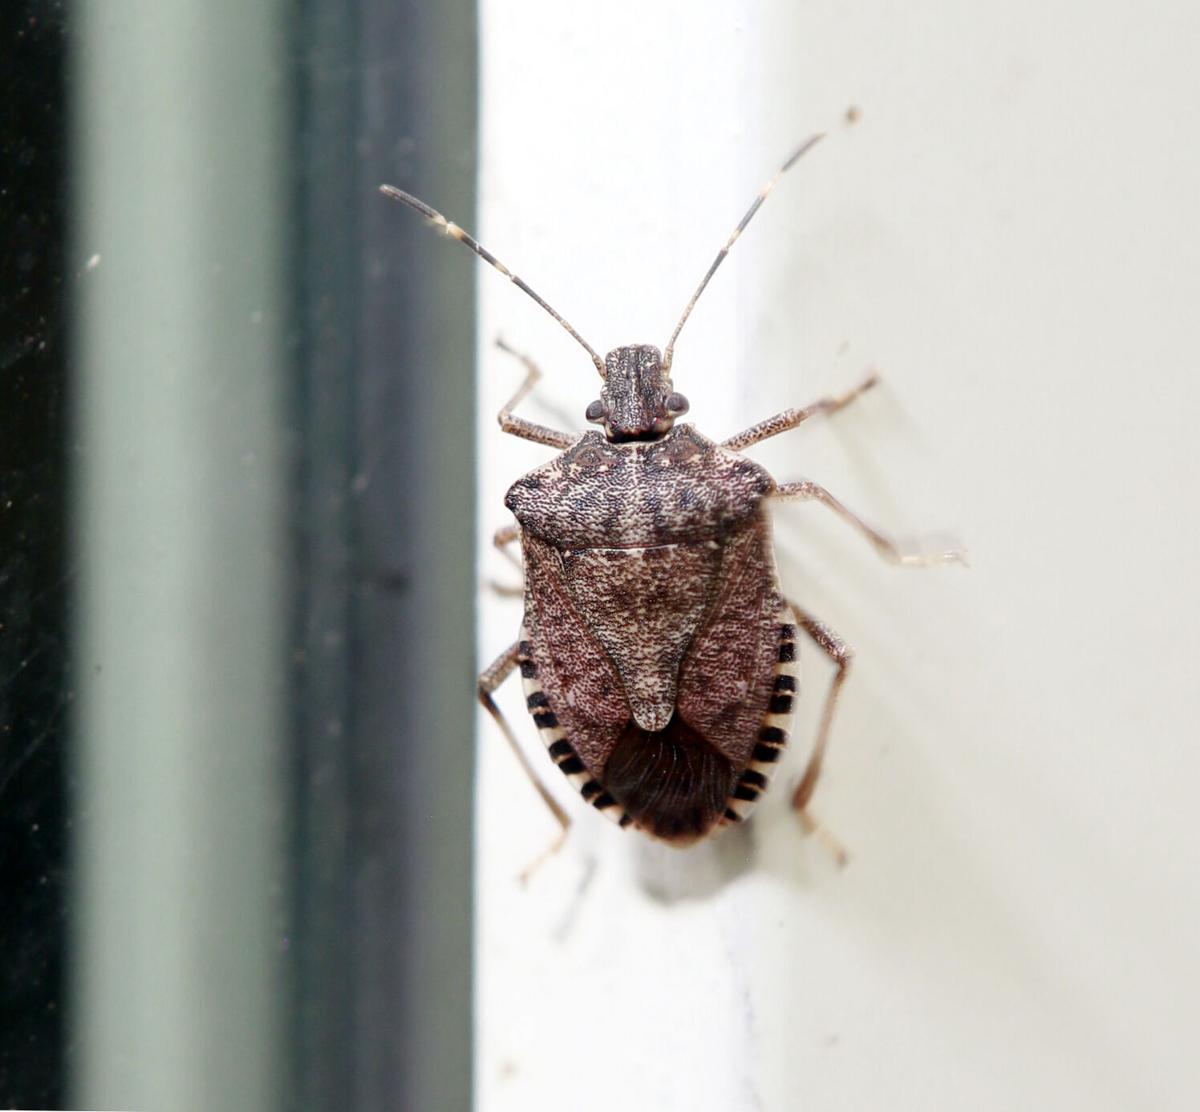 9 Insects That May Be Those Little Black Bugs in The Kitchen - Bob